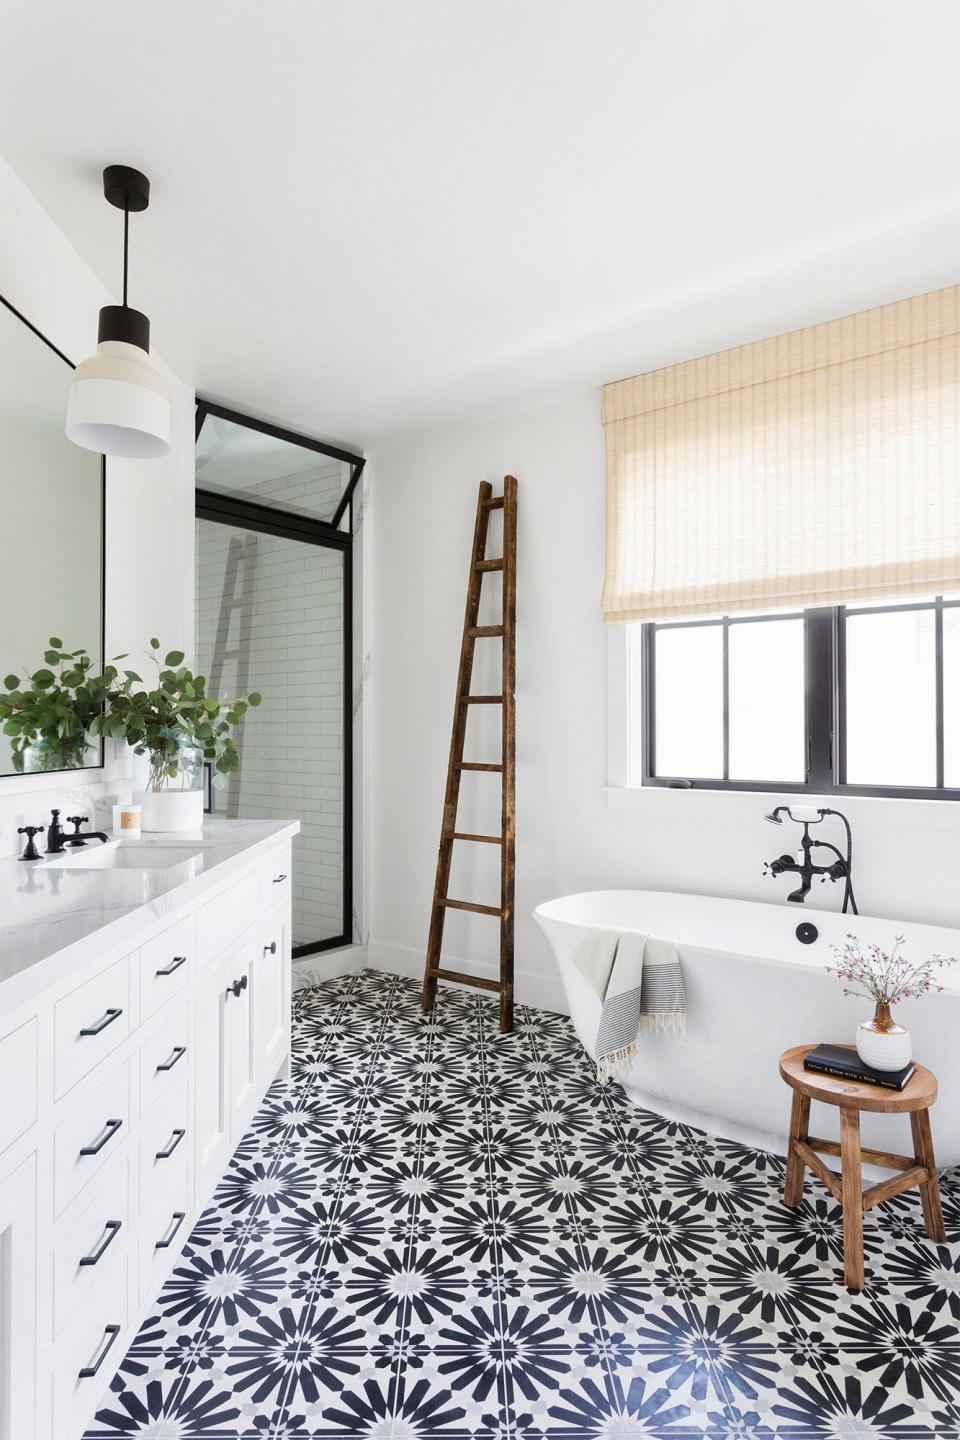 24 Guest Bathroom Ideas That'll Give Your Visitors a Warm Welcome